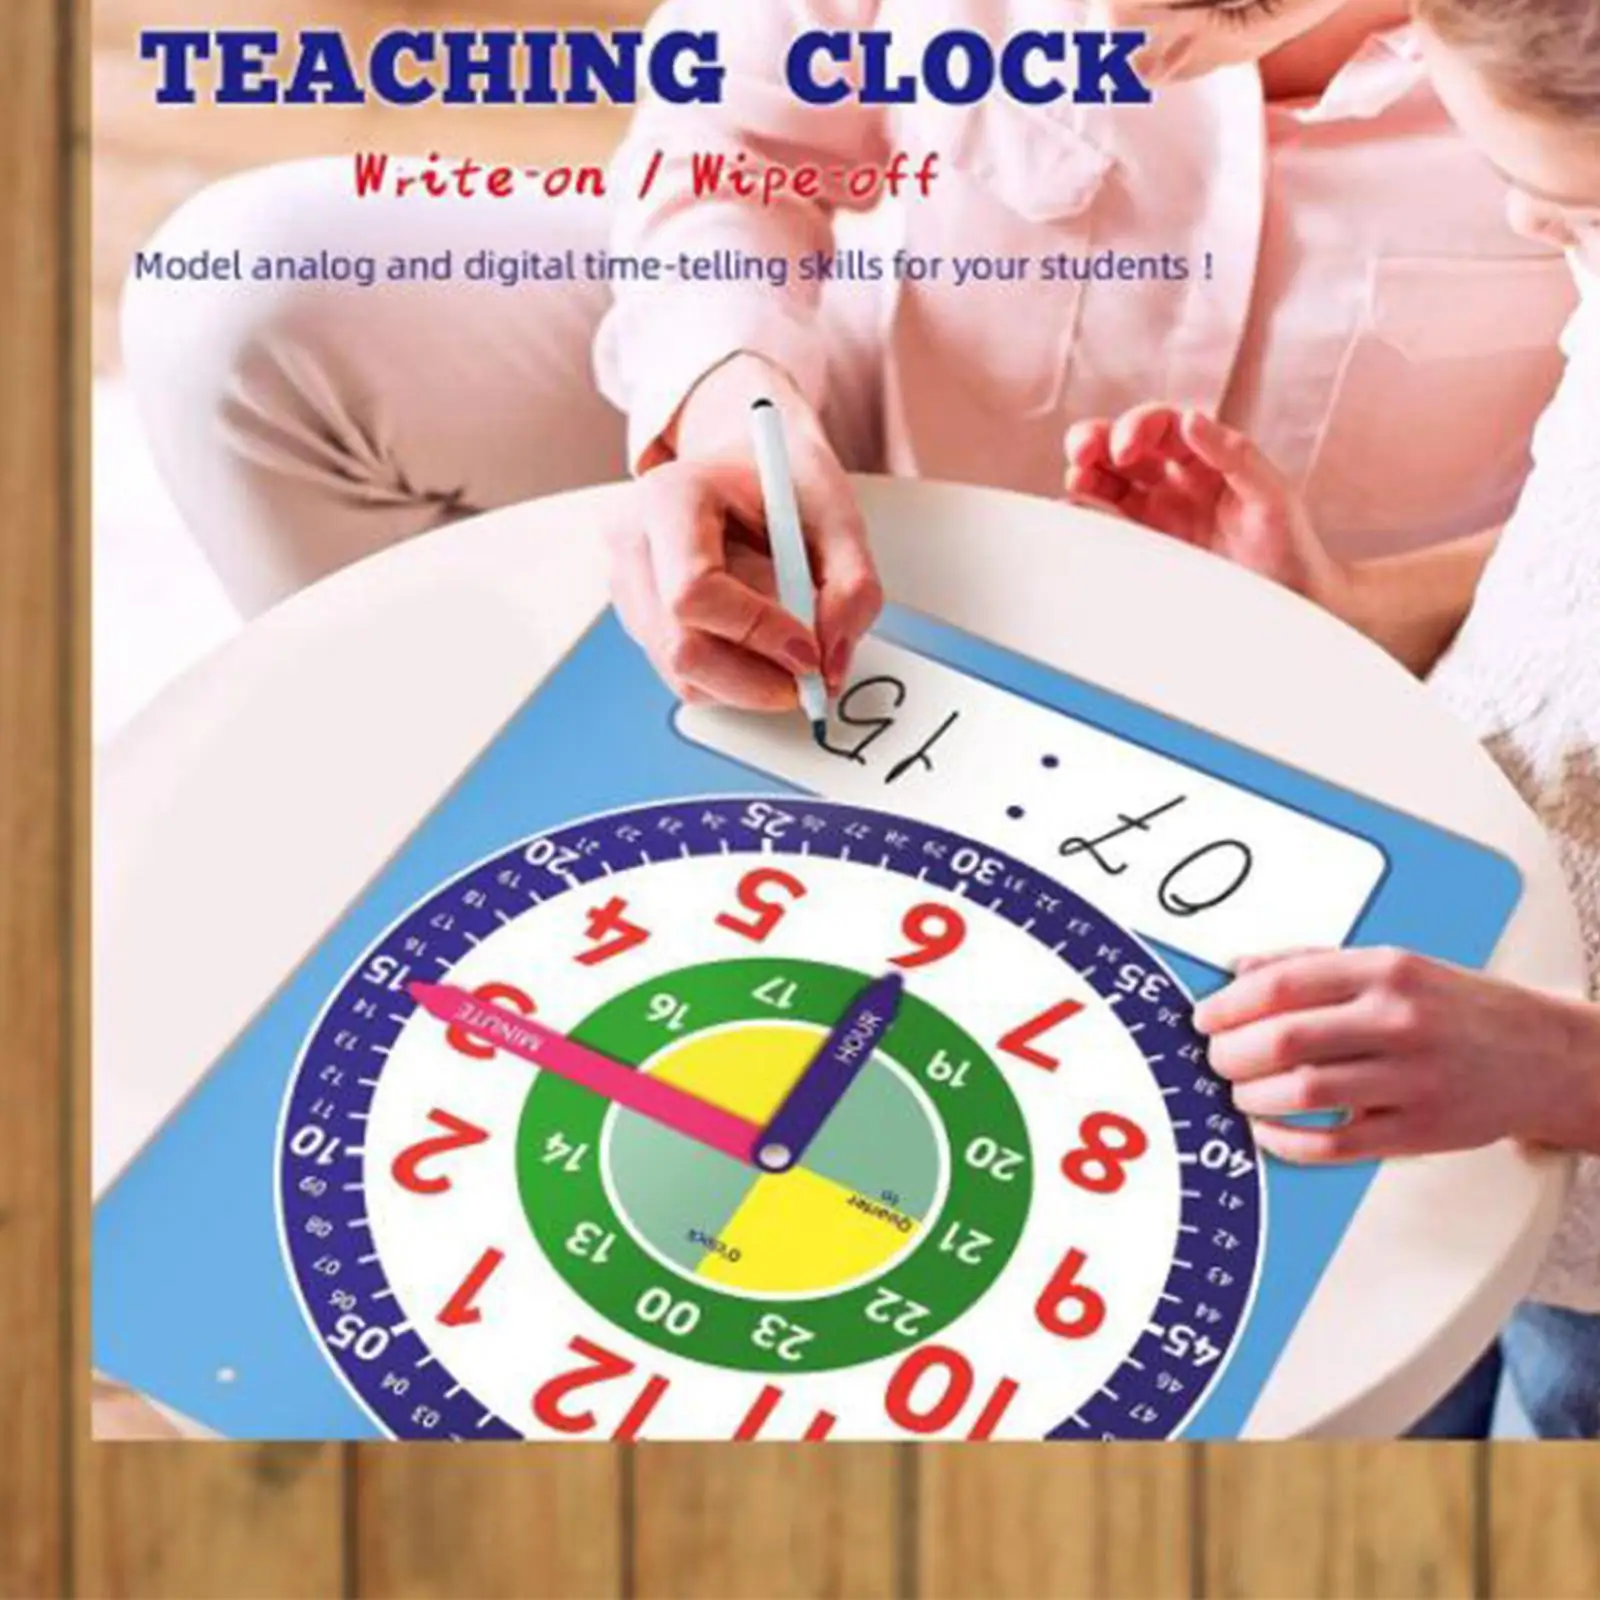 Paper Clock Teaching Time Montessori Early Learning Math Toy for Homeschool